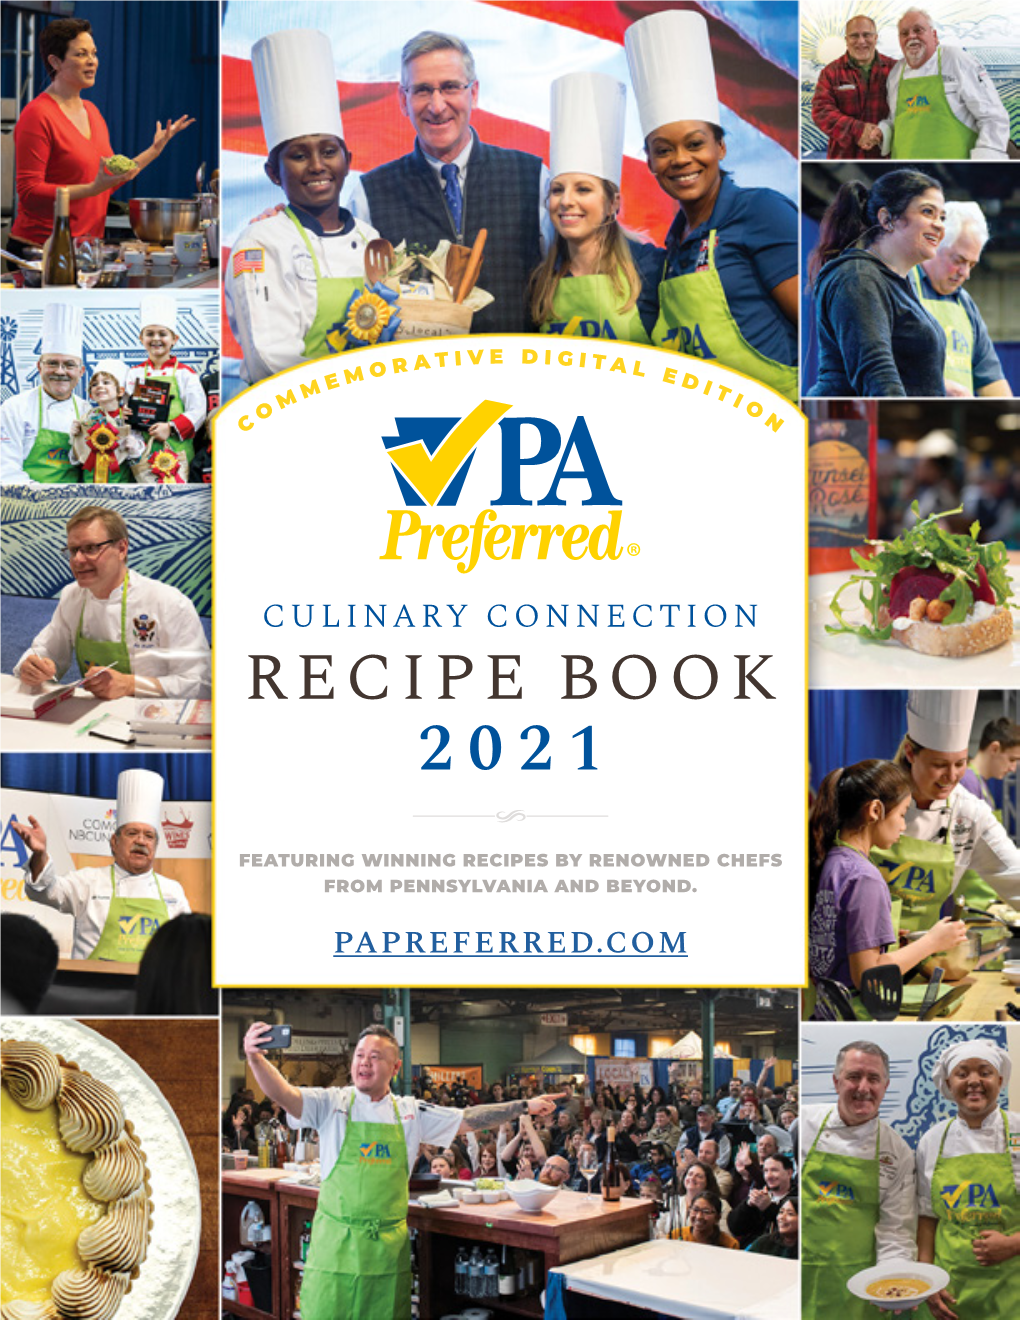 2021 Pa Preferred® Culinary Connection Recipe Book Is Sponsored by the Giant® Company